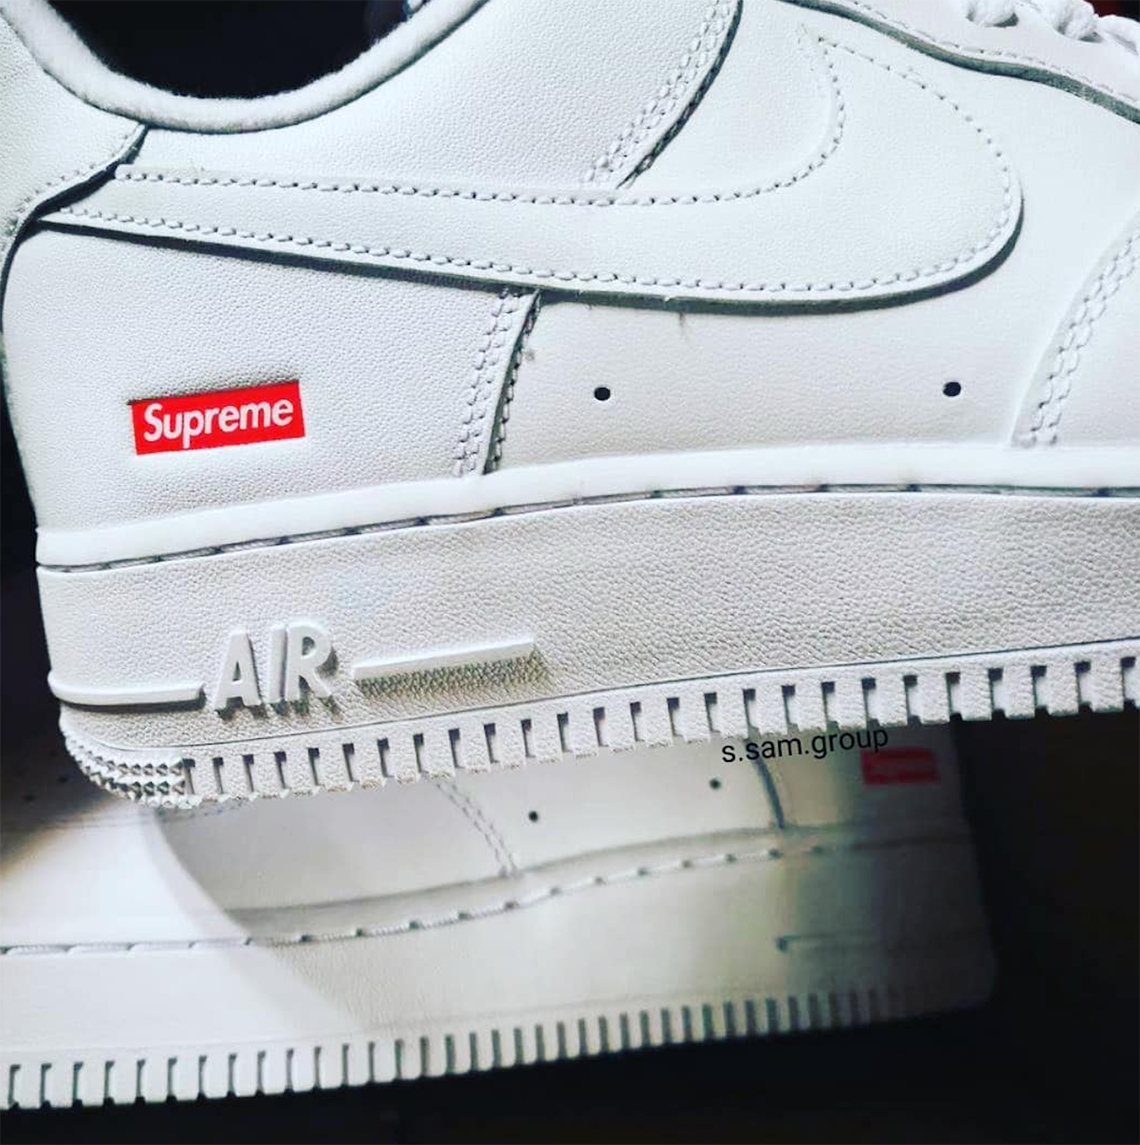 Supreme Air Force 1 Low 2020 Release Info | SneakerNews.com